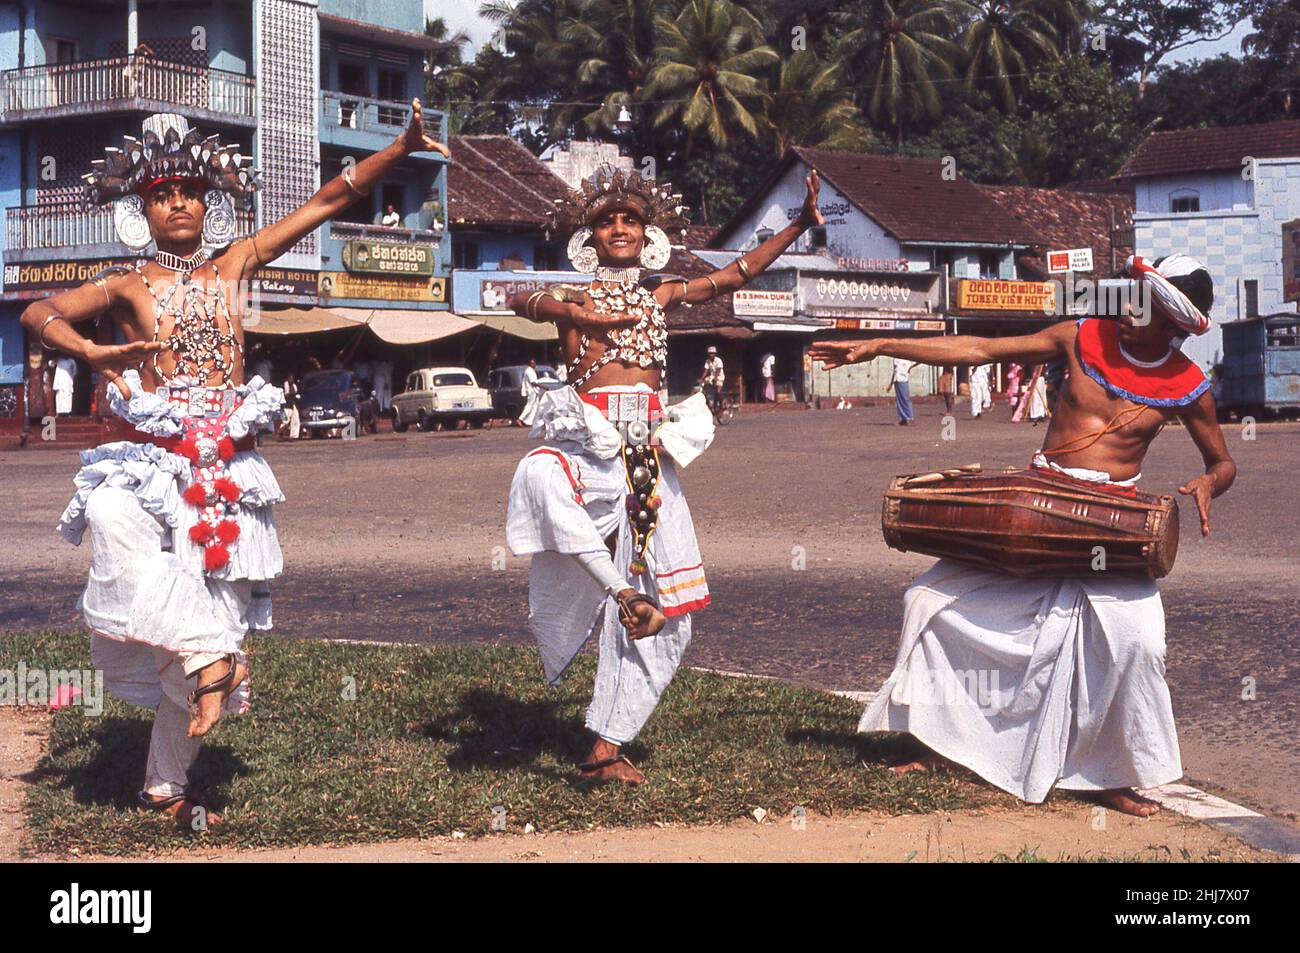 1960s, historical, Ceylon, outside in a village square, on a grass verge, two adult males in costumes, headwear  and decorated flowers, performing the traditional Kandyan dance, accompanied by a drummer playing the gata bera, the traditional srilankan drum. The Kandyan dance has a long history in the country and the ritual is performed with the belief that its blesses people with prosperity and long life. Since its orgins many centuries ago, the dance has become a symbol of Sri Lankan national identity. Stock Photo